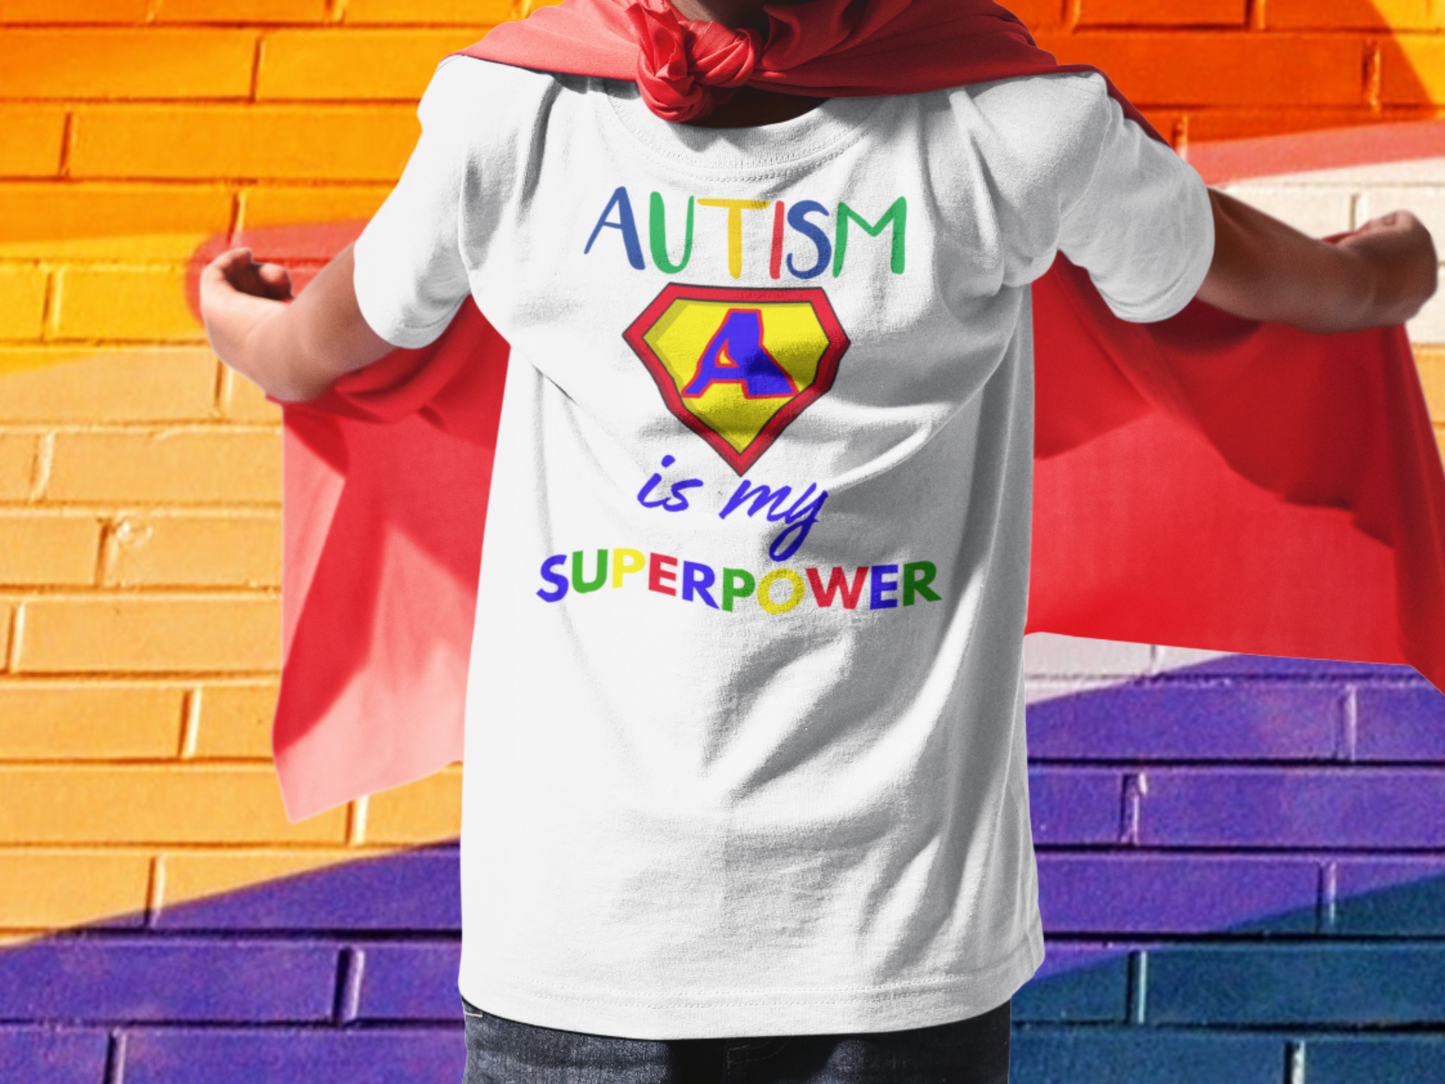 Autism is my superpower children's organic t-shirt ages 3-14